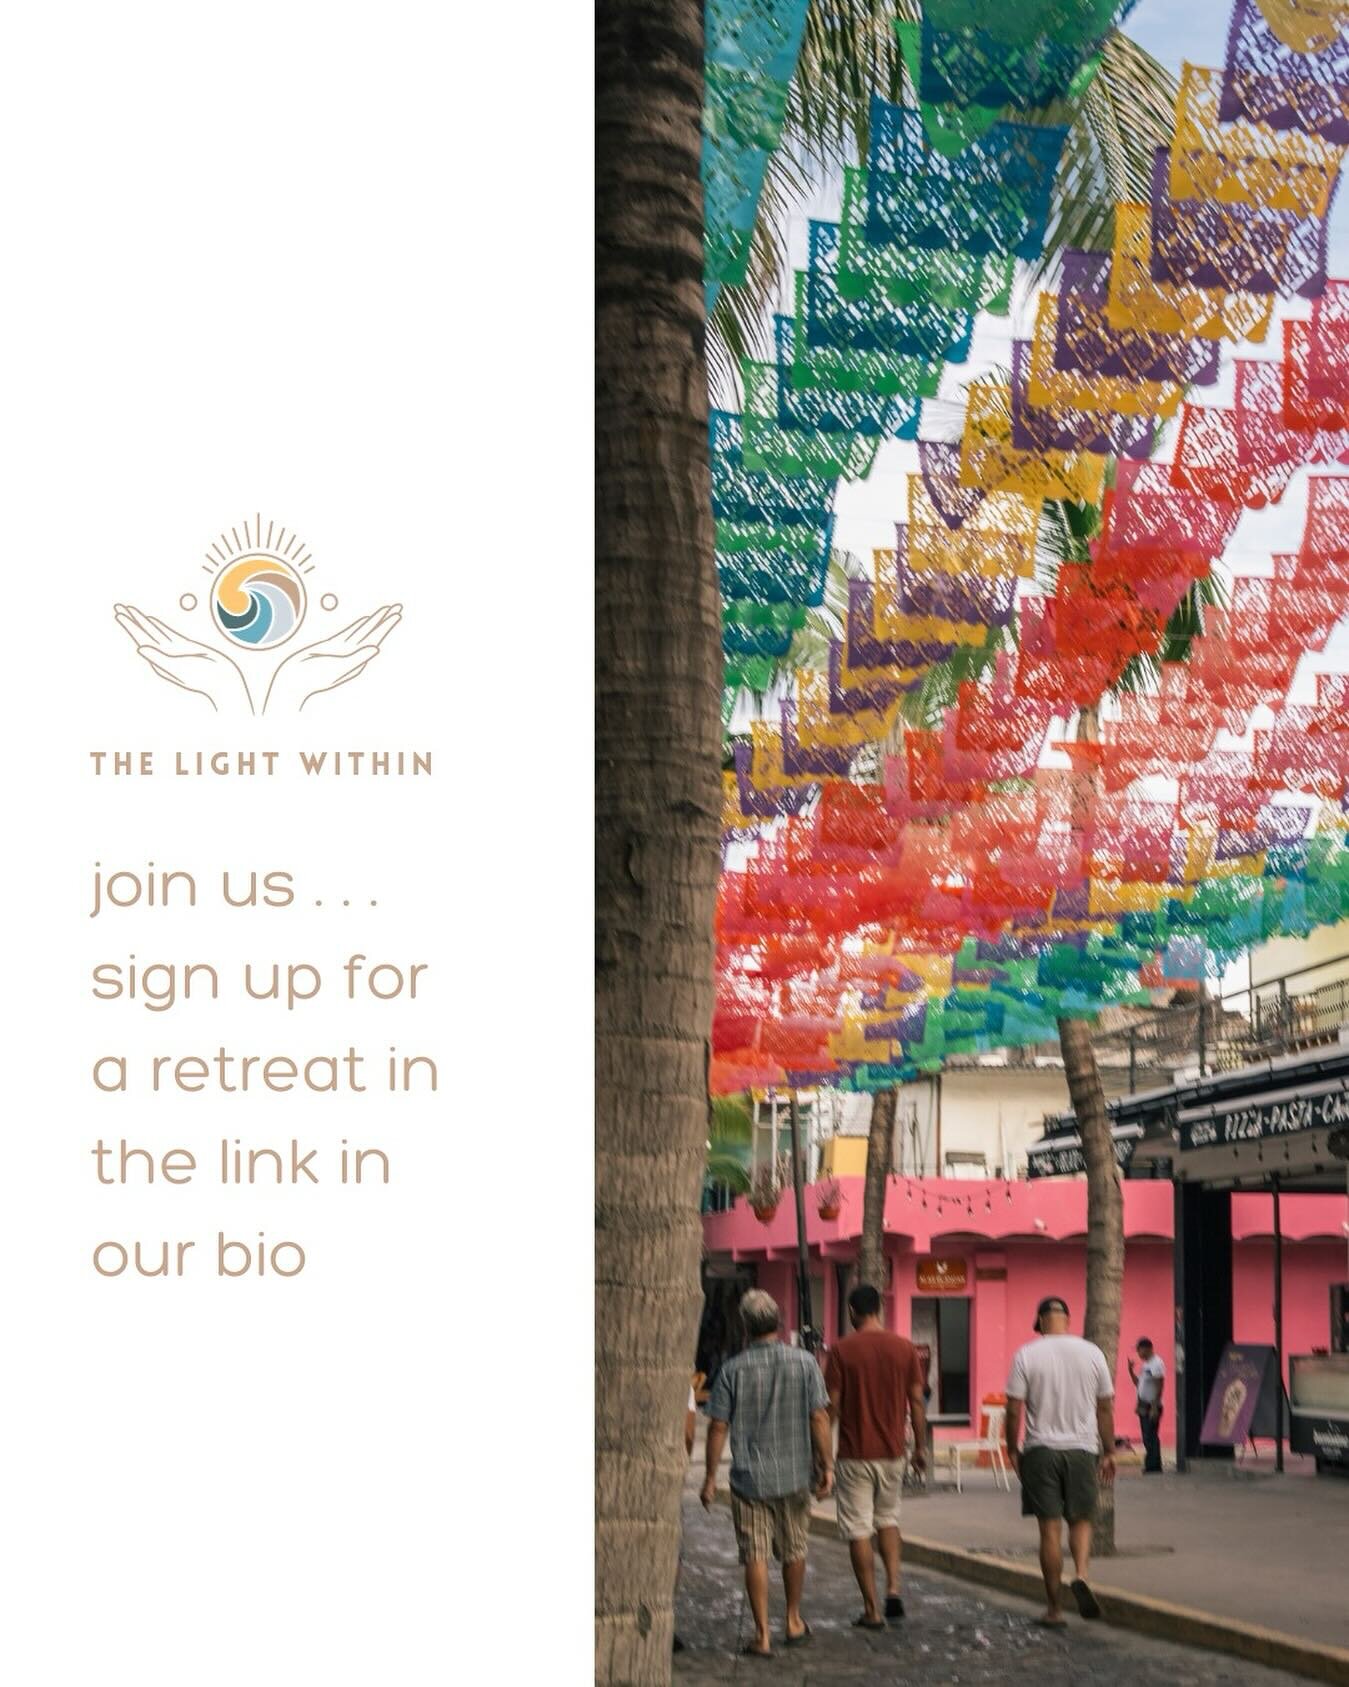 We invite you to discover your own transformation in 2024 at a uniquely curated wellness retreat -- designed specifically for those who have lost someone they know to suicide. These retreats, brought to you by The Light Within, are designed to embrac